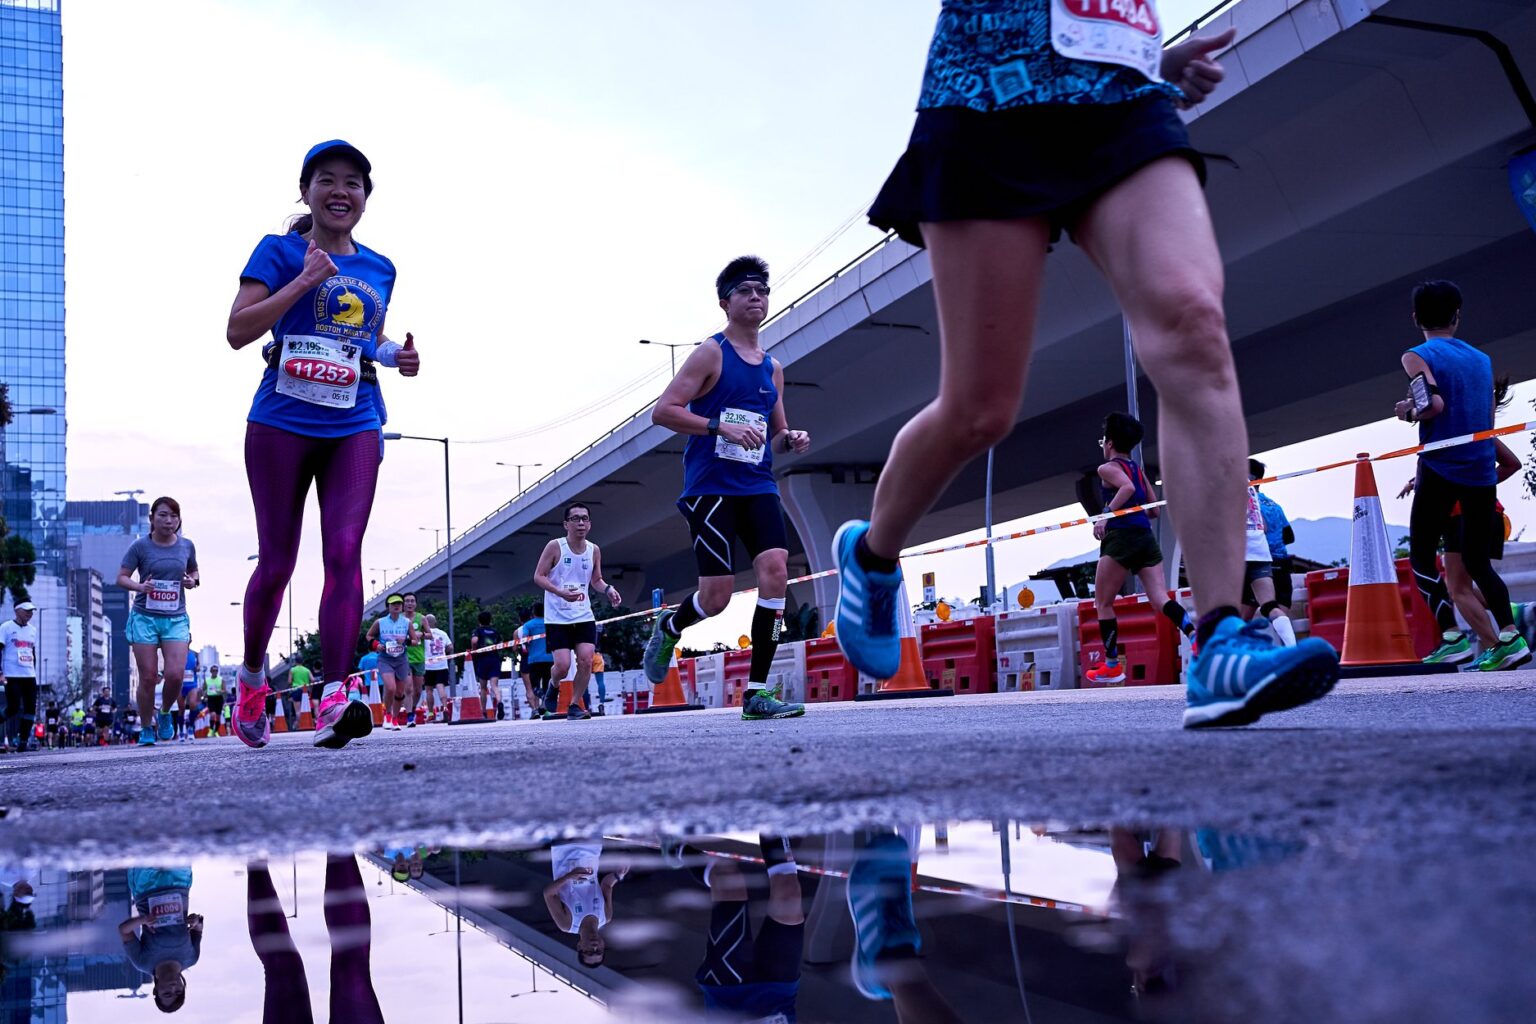 A low-angle shot of runners at the Hong Kong Streetathon. Some of the runners' reflections can be seen in a puddle as they run with an elevated expresswayin the background.